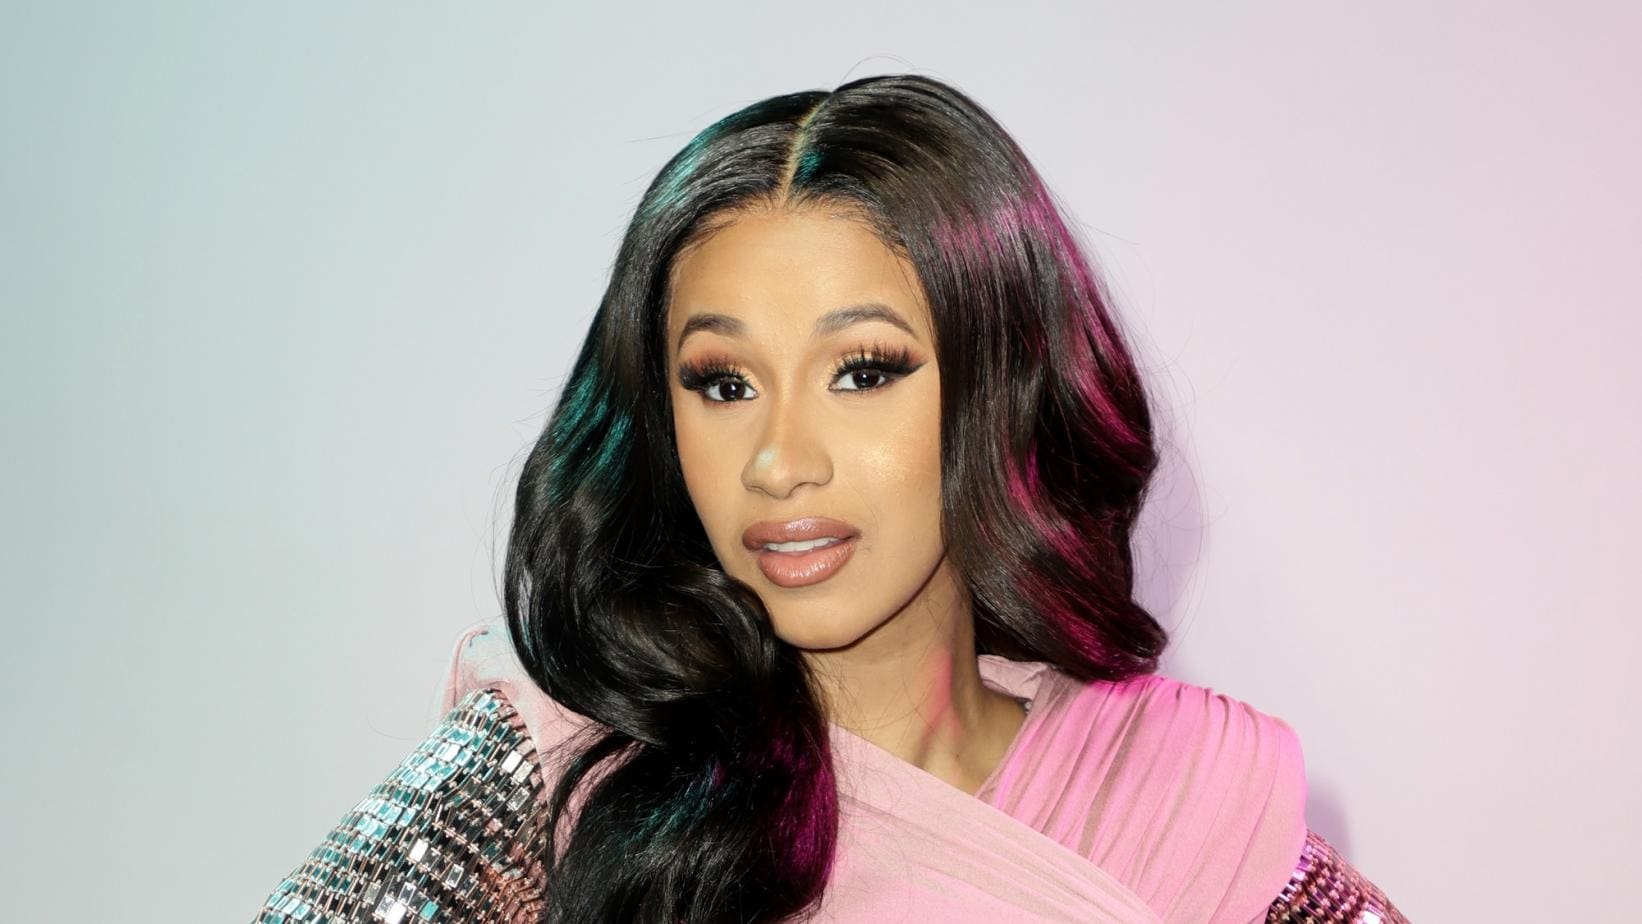 Cardi B's Friend, Star Brim Is Released From Prison - Here's The Surprise That Star Received